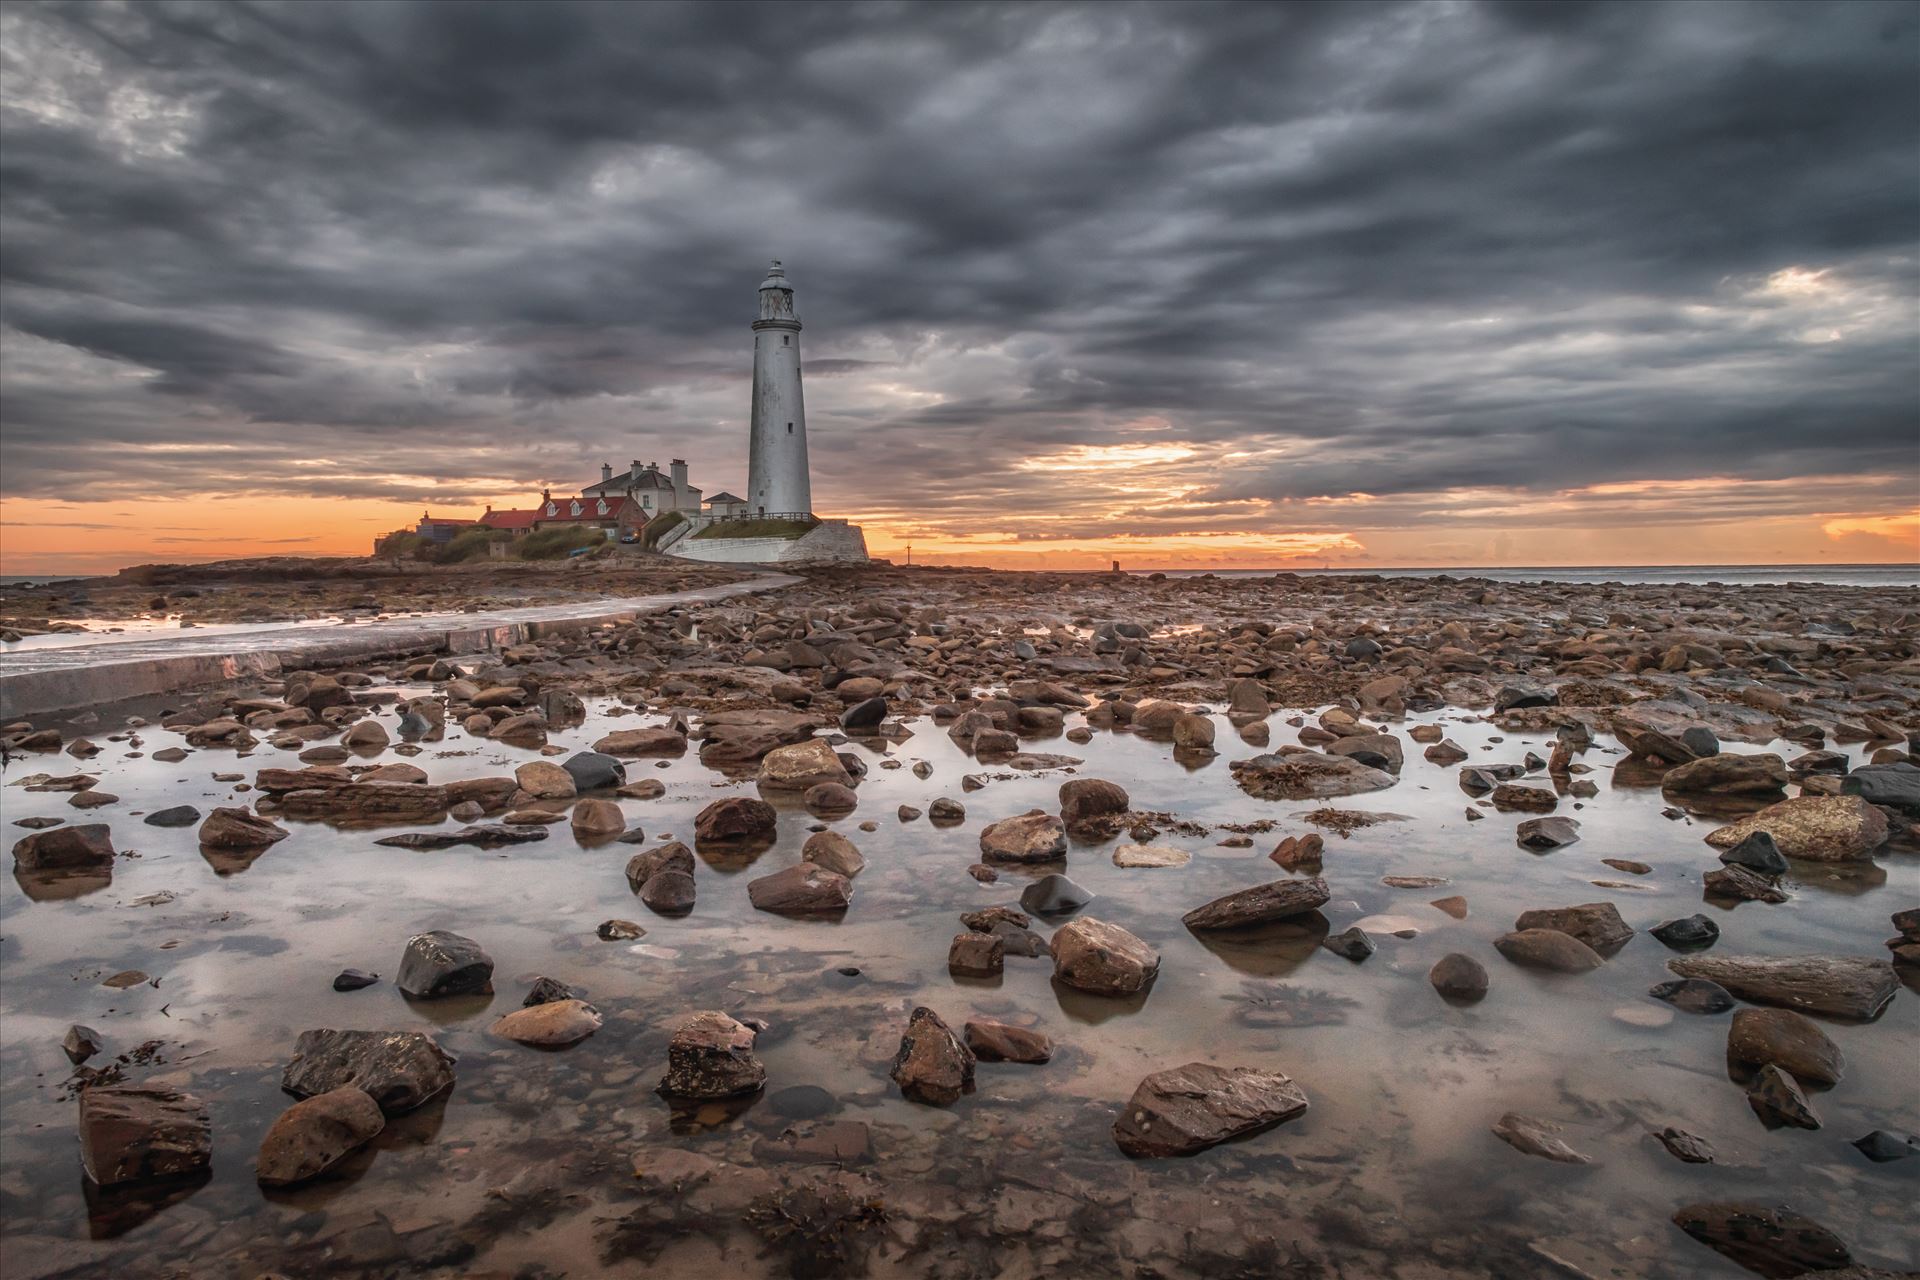 St Mary`s Lighthouse & island - St Mary`s lighthouse stands on a small rocky tidal island is linked to the mainland by a short concrete causeway which is submerged at high tide. The lighthouse was built in 1898 & was decommissioned in 1984, 2 years after becoming automatic. by philreay